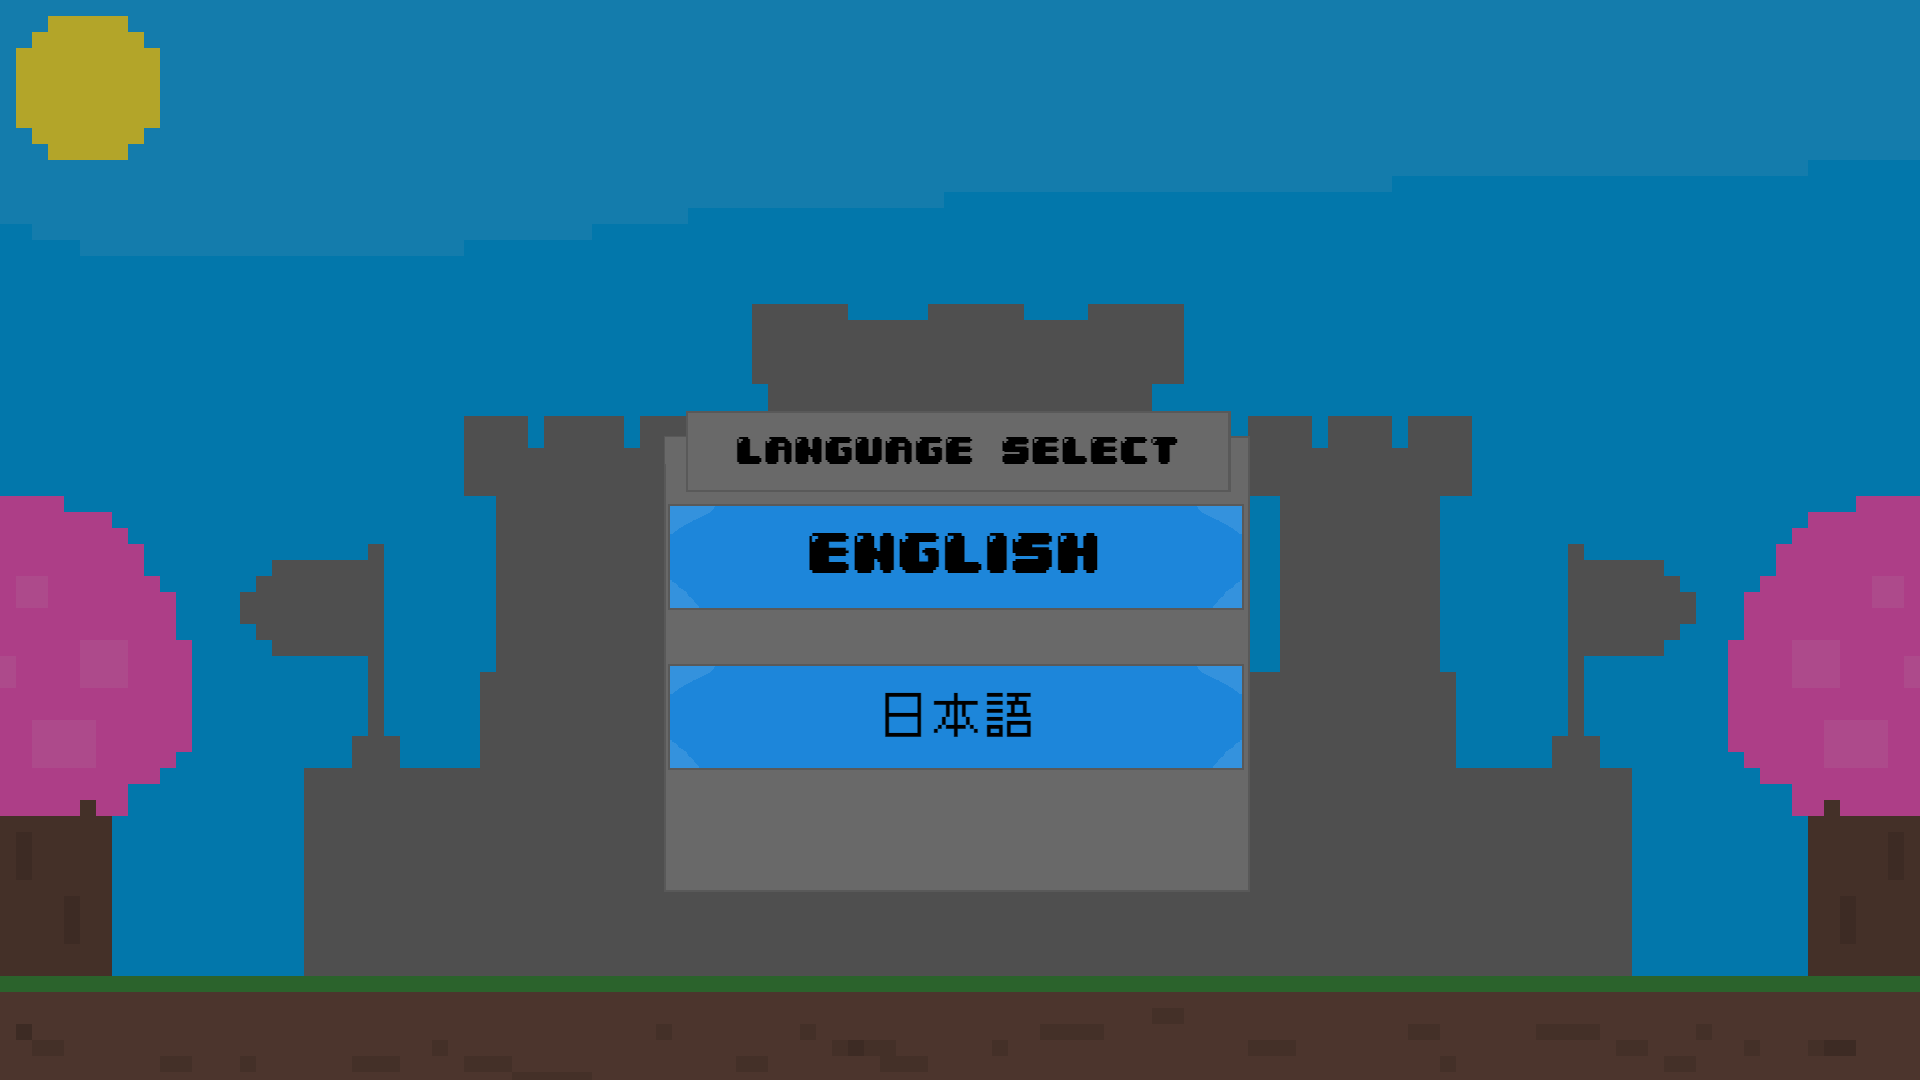 wings-power-language-select-18.02.2021.png